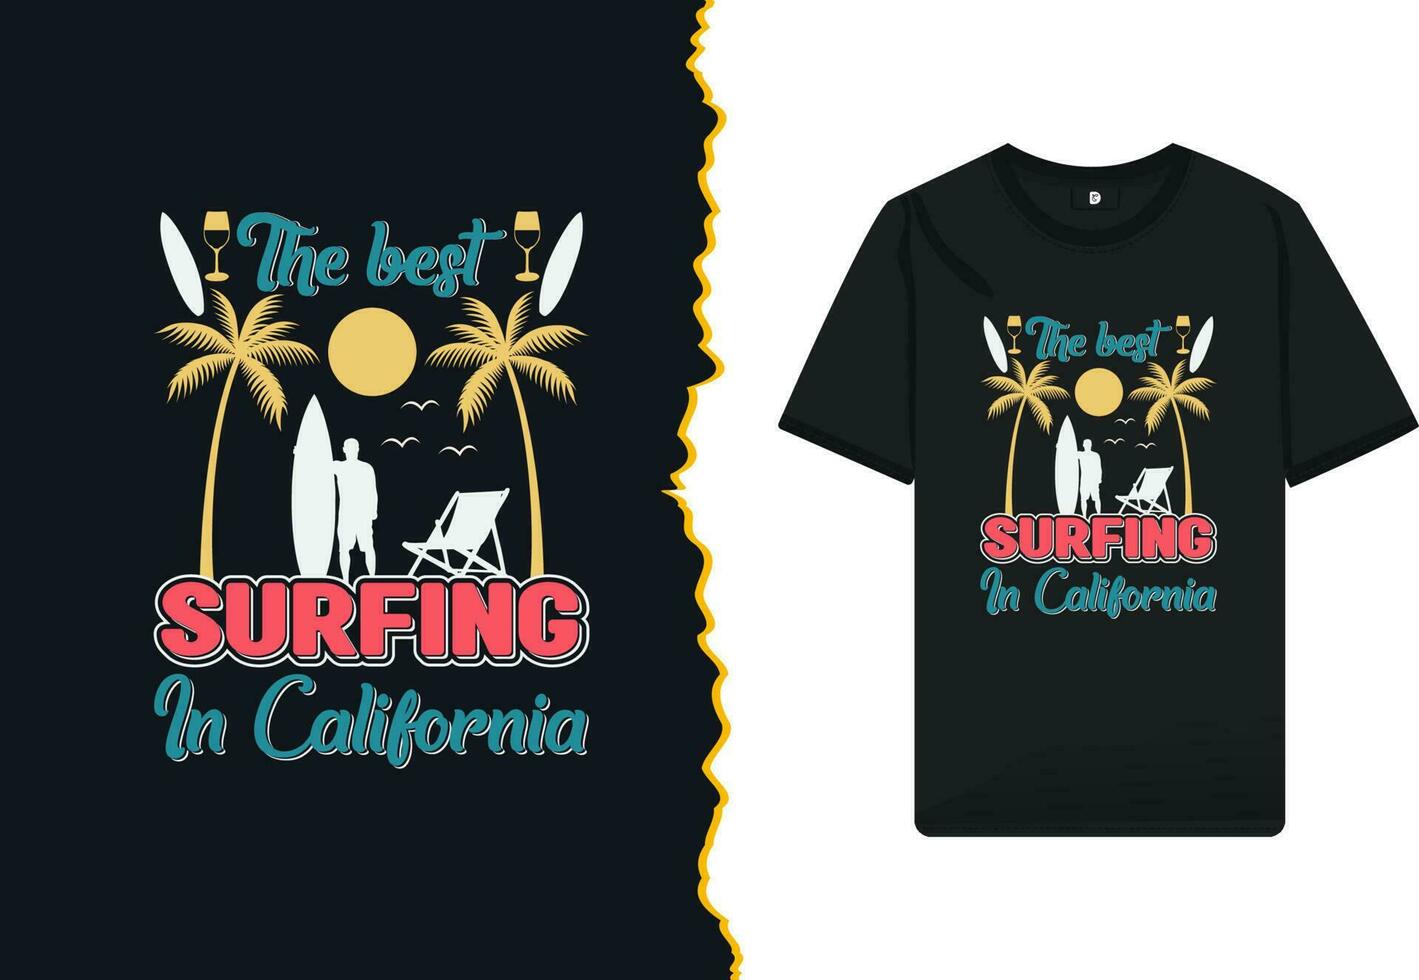 The best surfing in California - summer t-shirt design template. Illustration with a sun, surfboard, palm tree, bird, and drink glass silhouette. vector